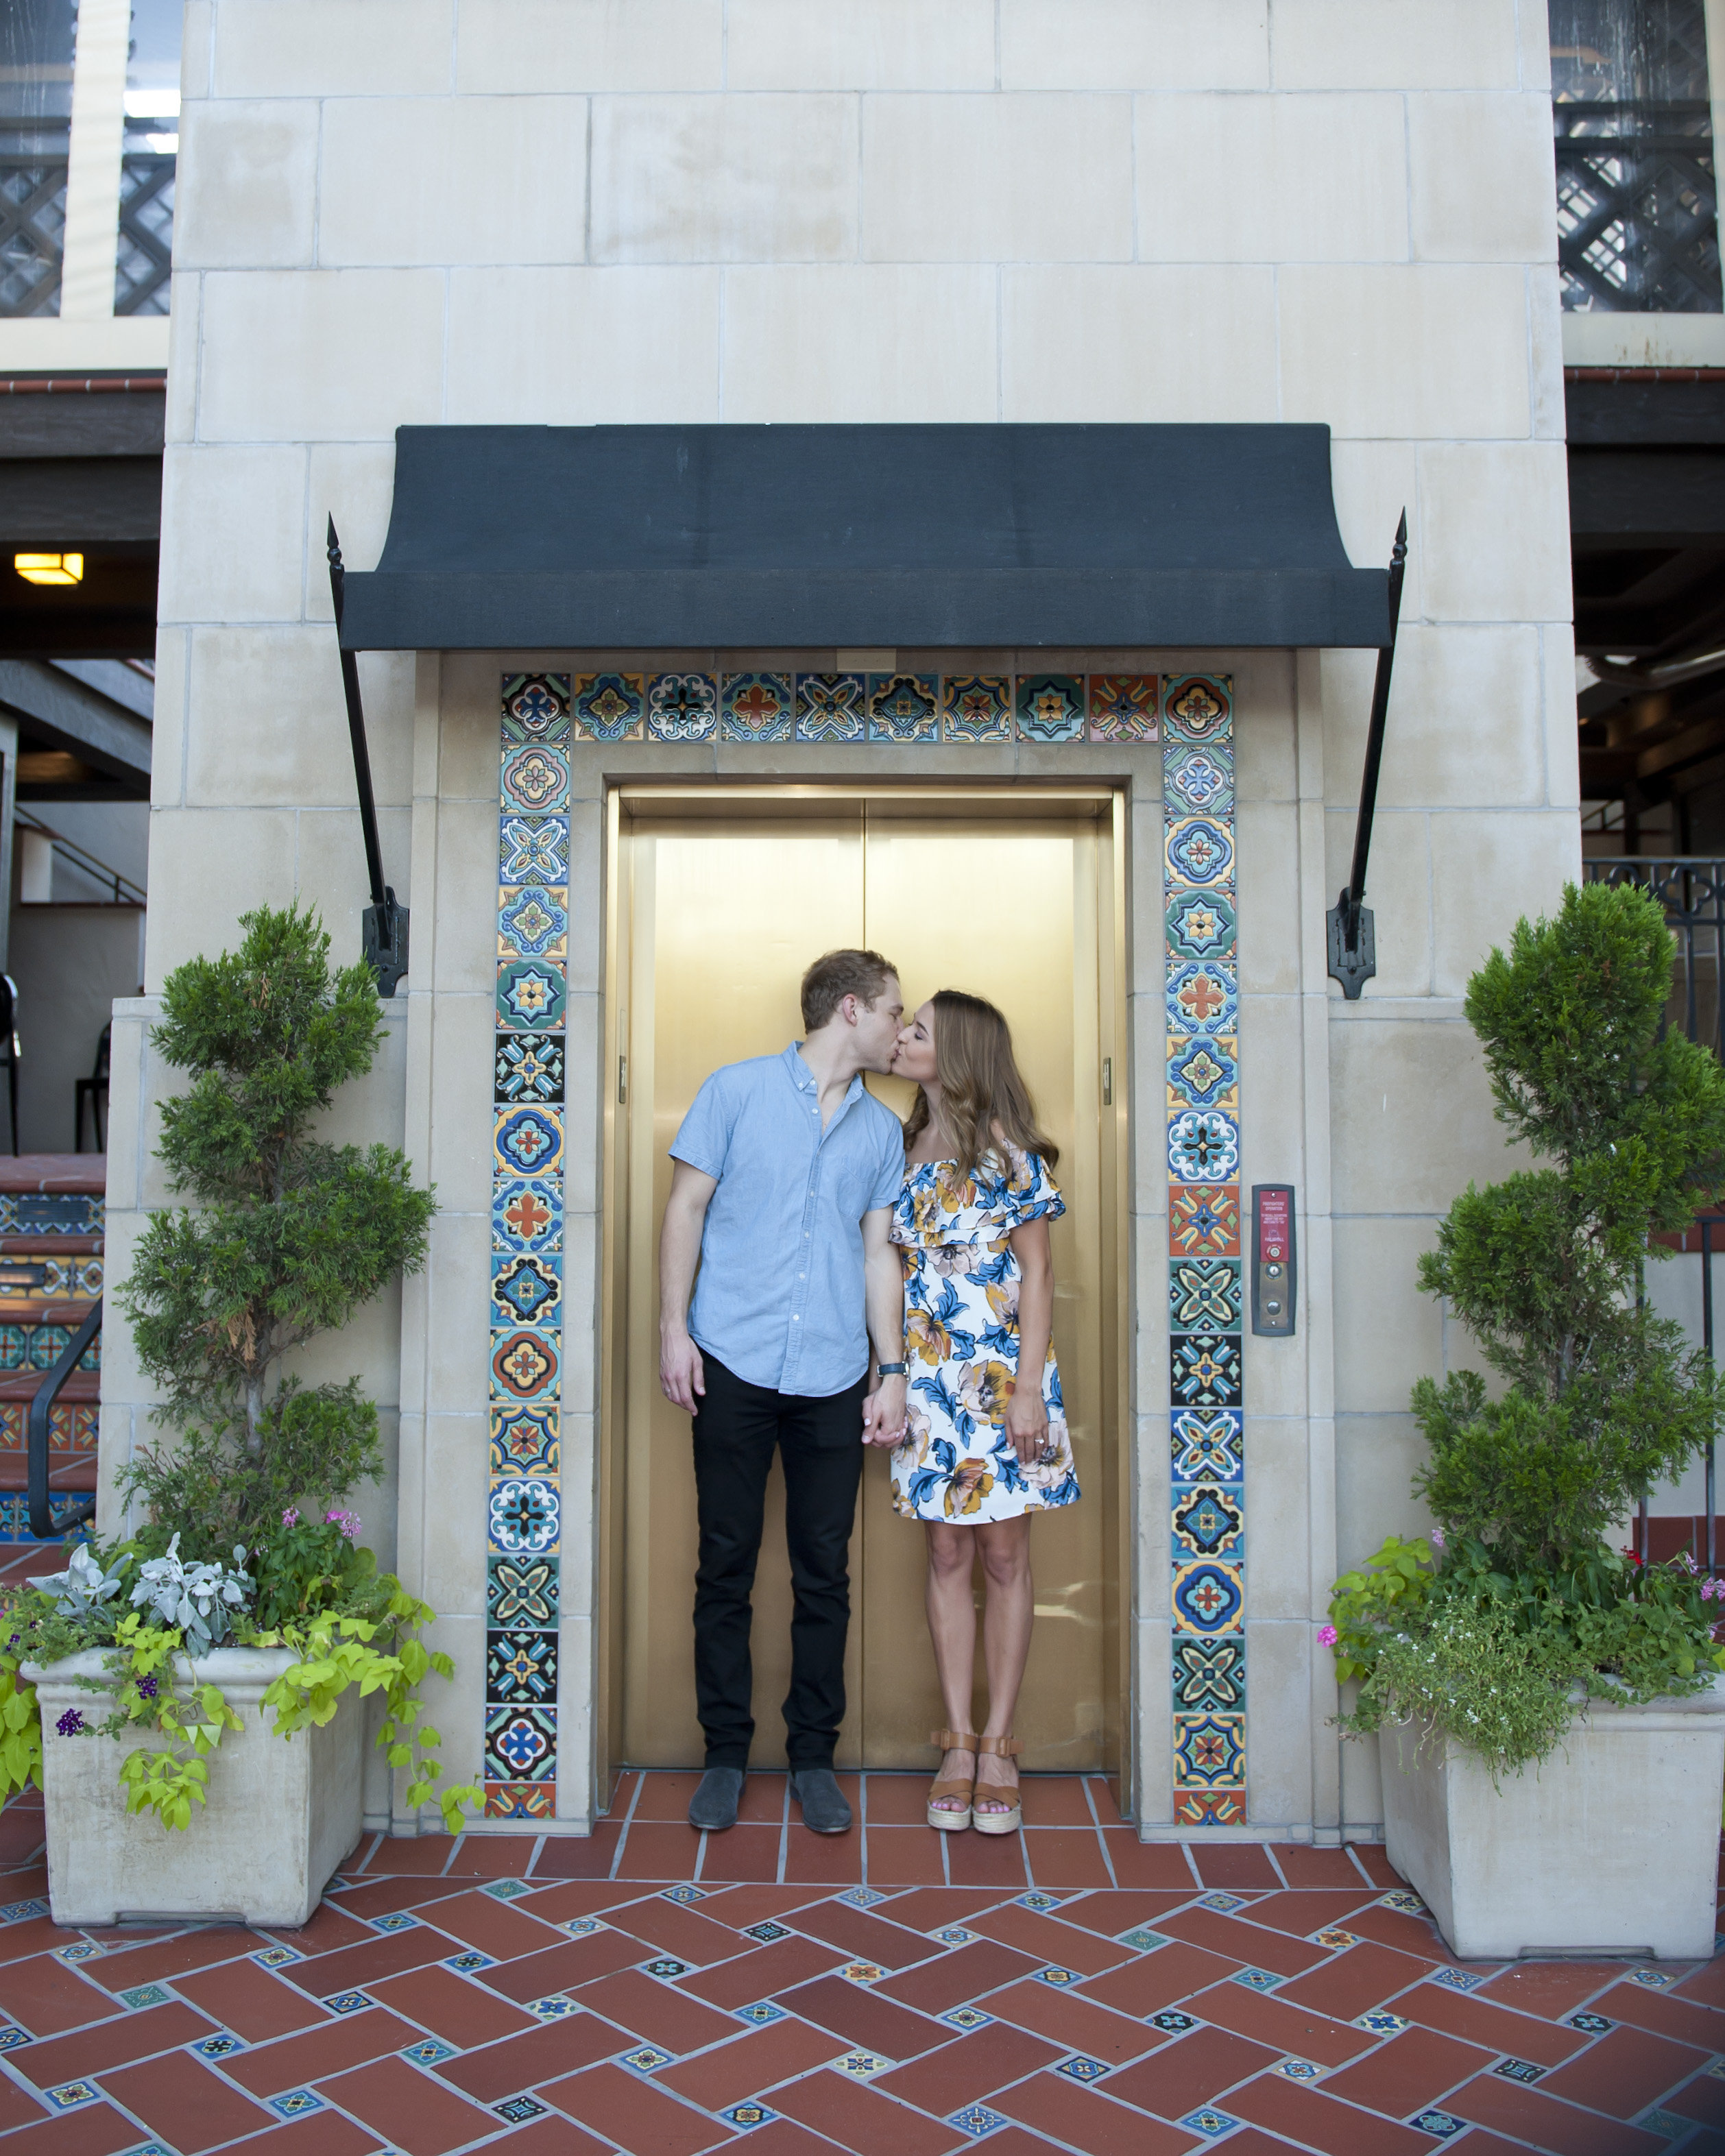 Couple Kissing in a Beautiful Entryway